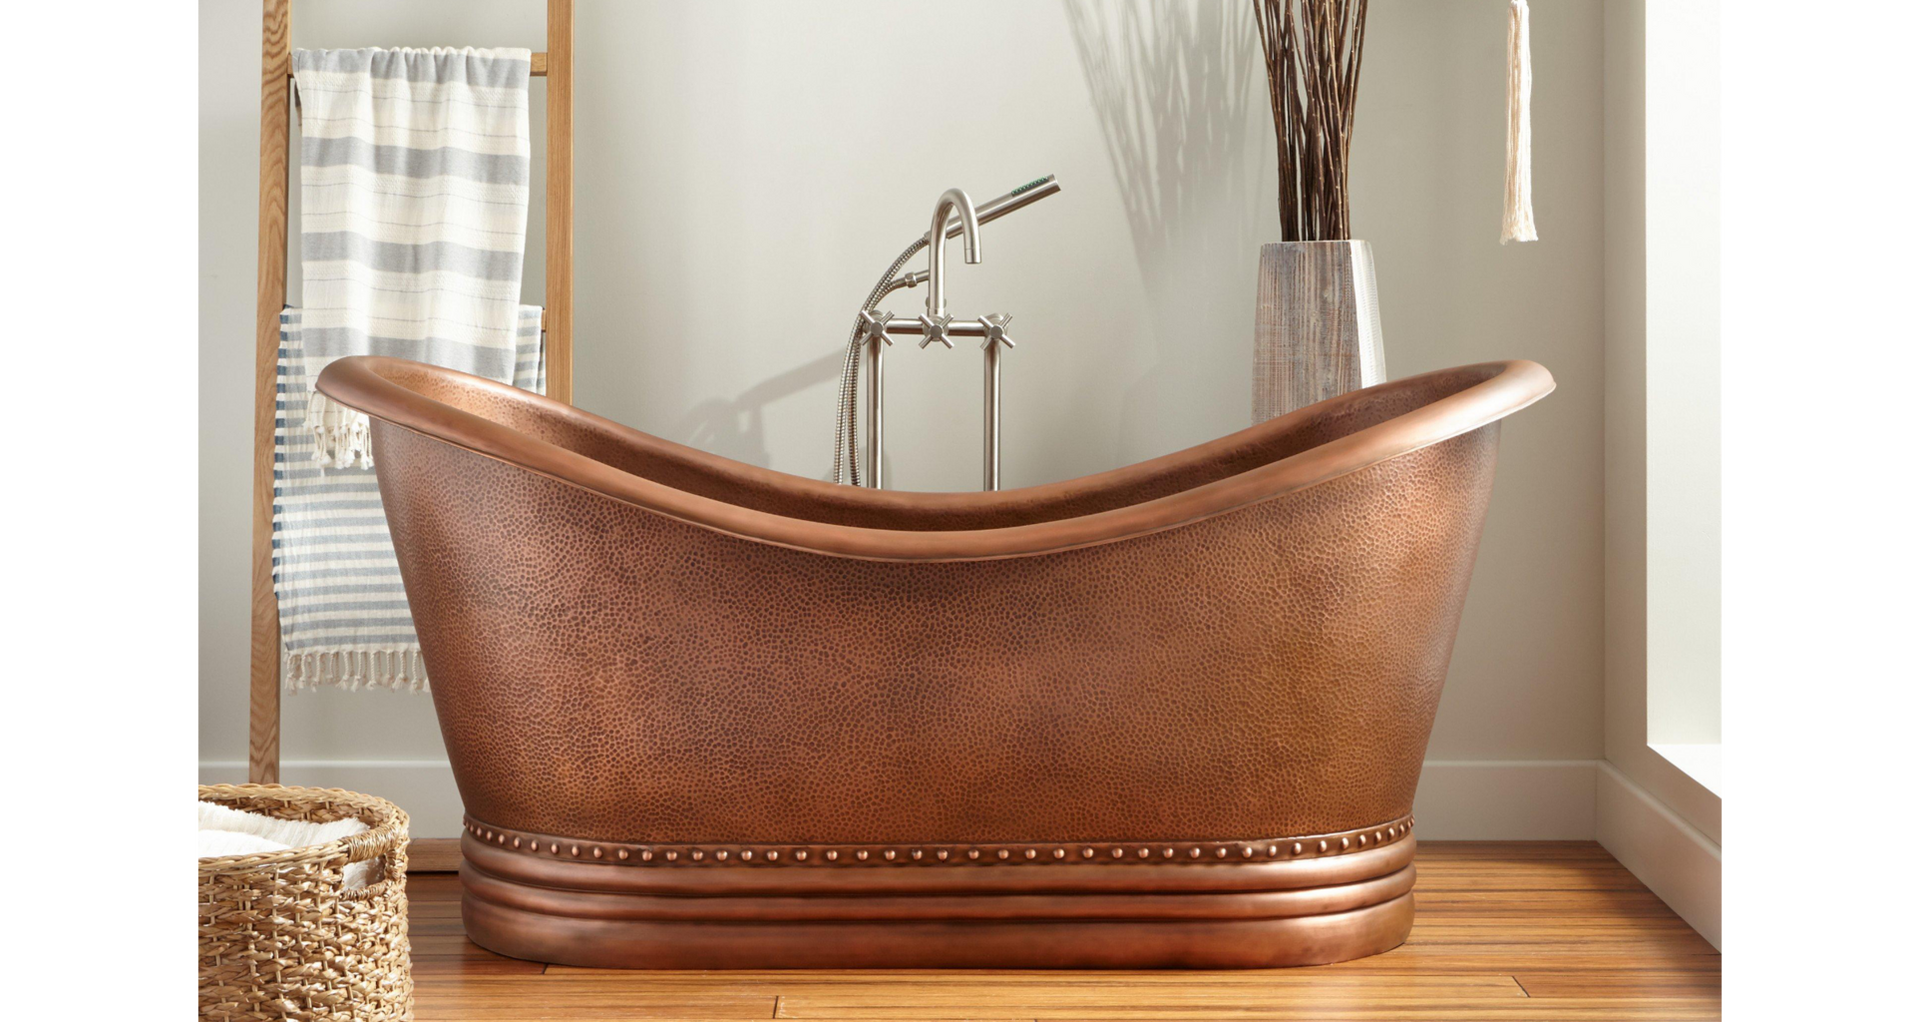 72" Paige Copper Double-Slipper Tub for cleaning copper